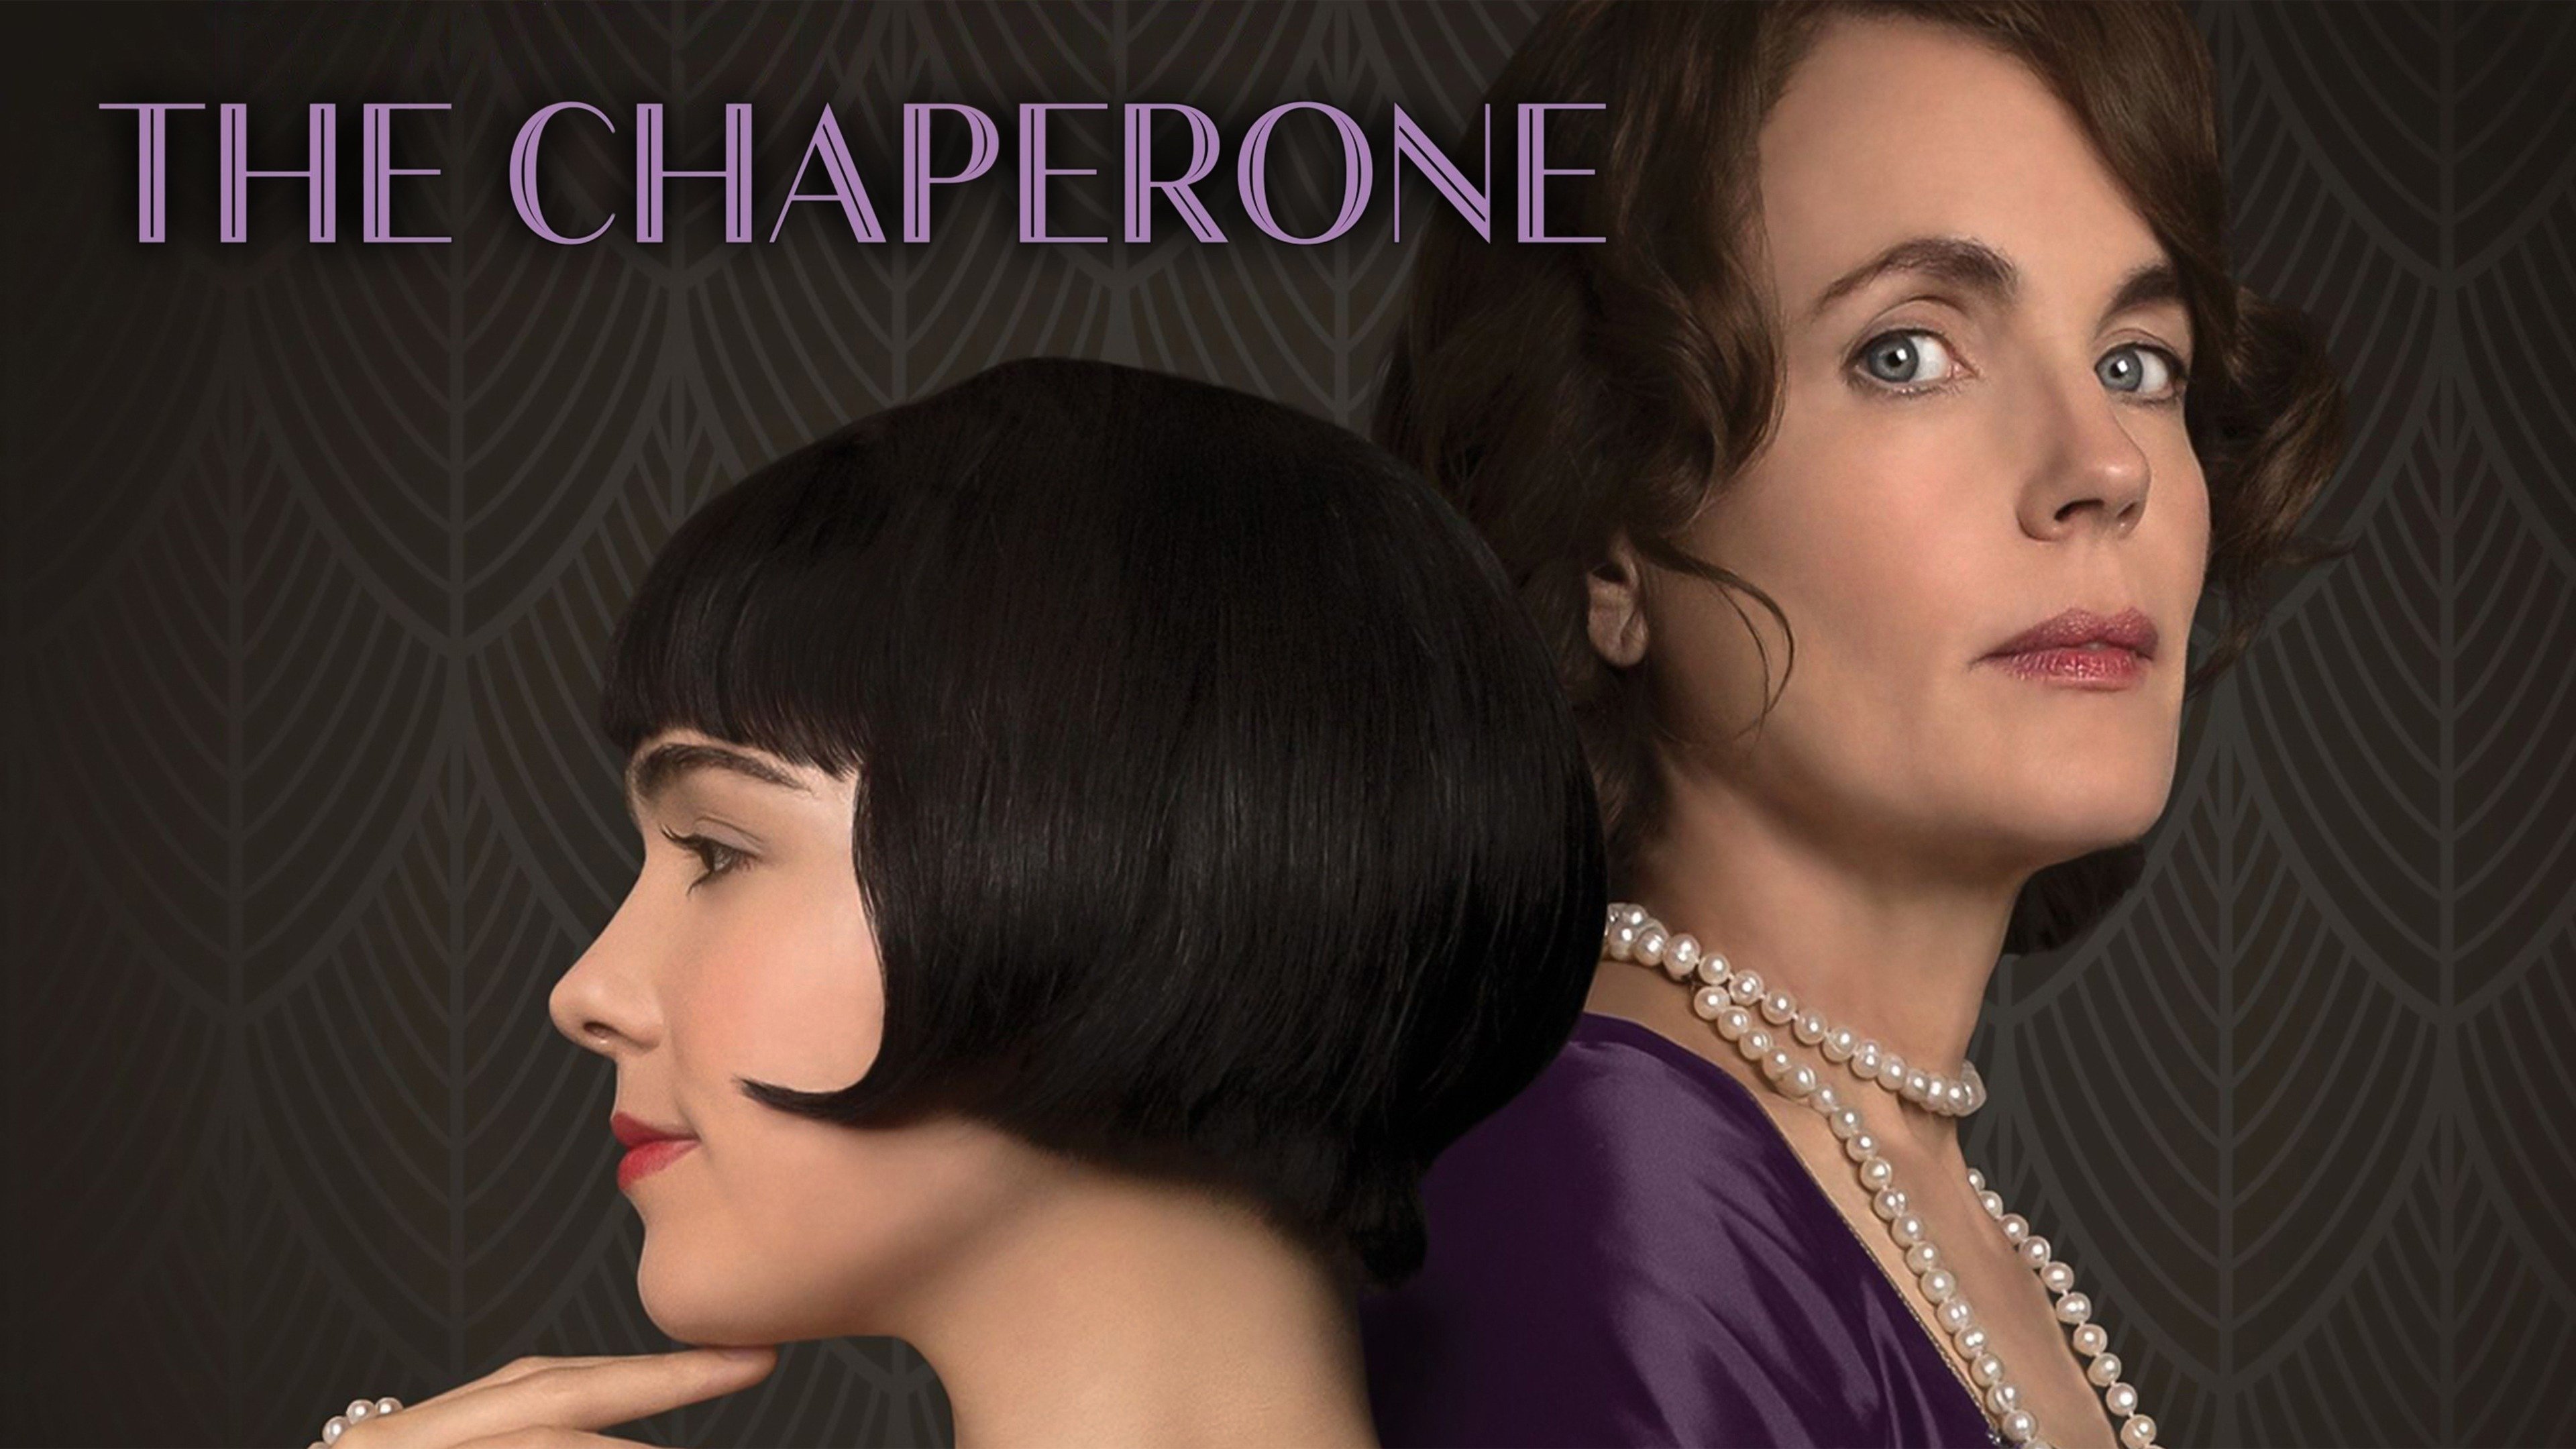 the chaperone pbs review